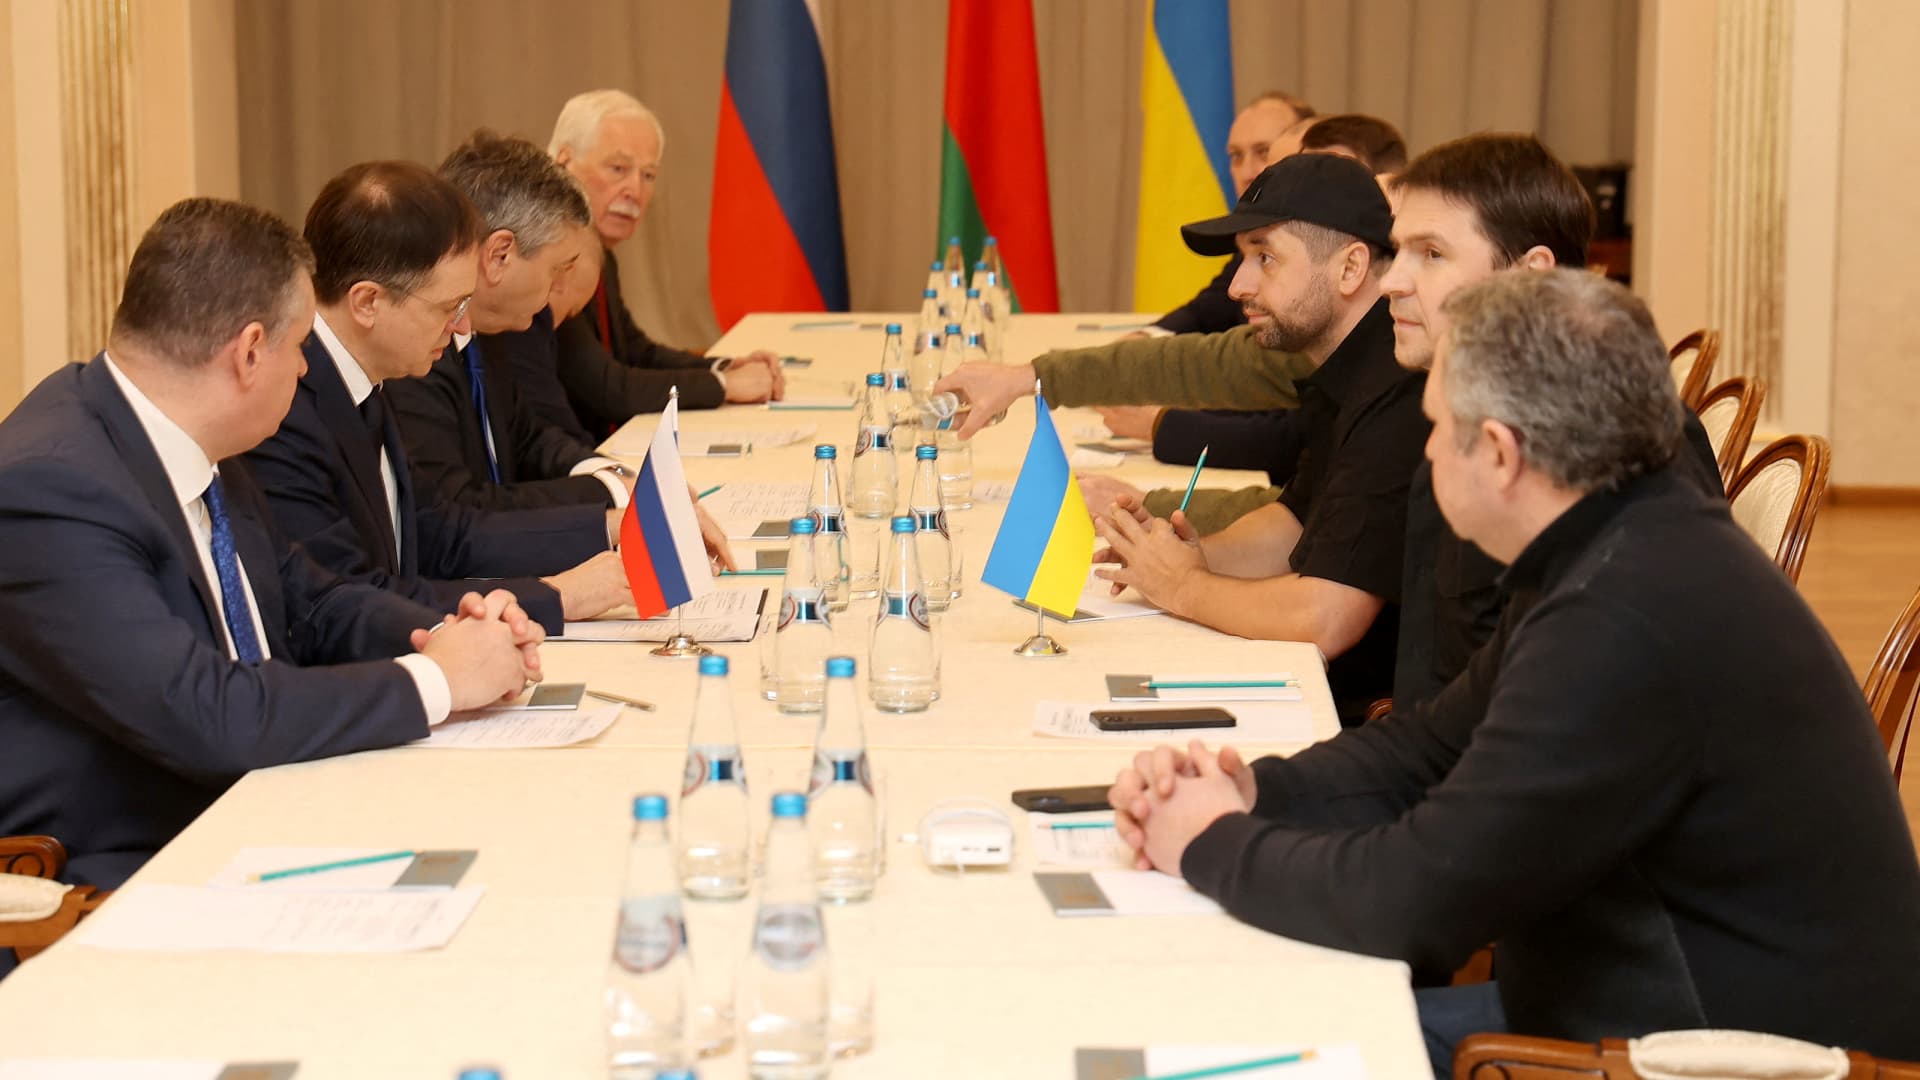 Russian and Ukrainian officials take part in the talks in the Gomel region, Belarus February 28, 2022.